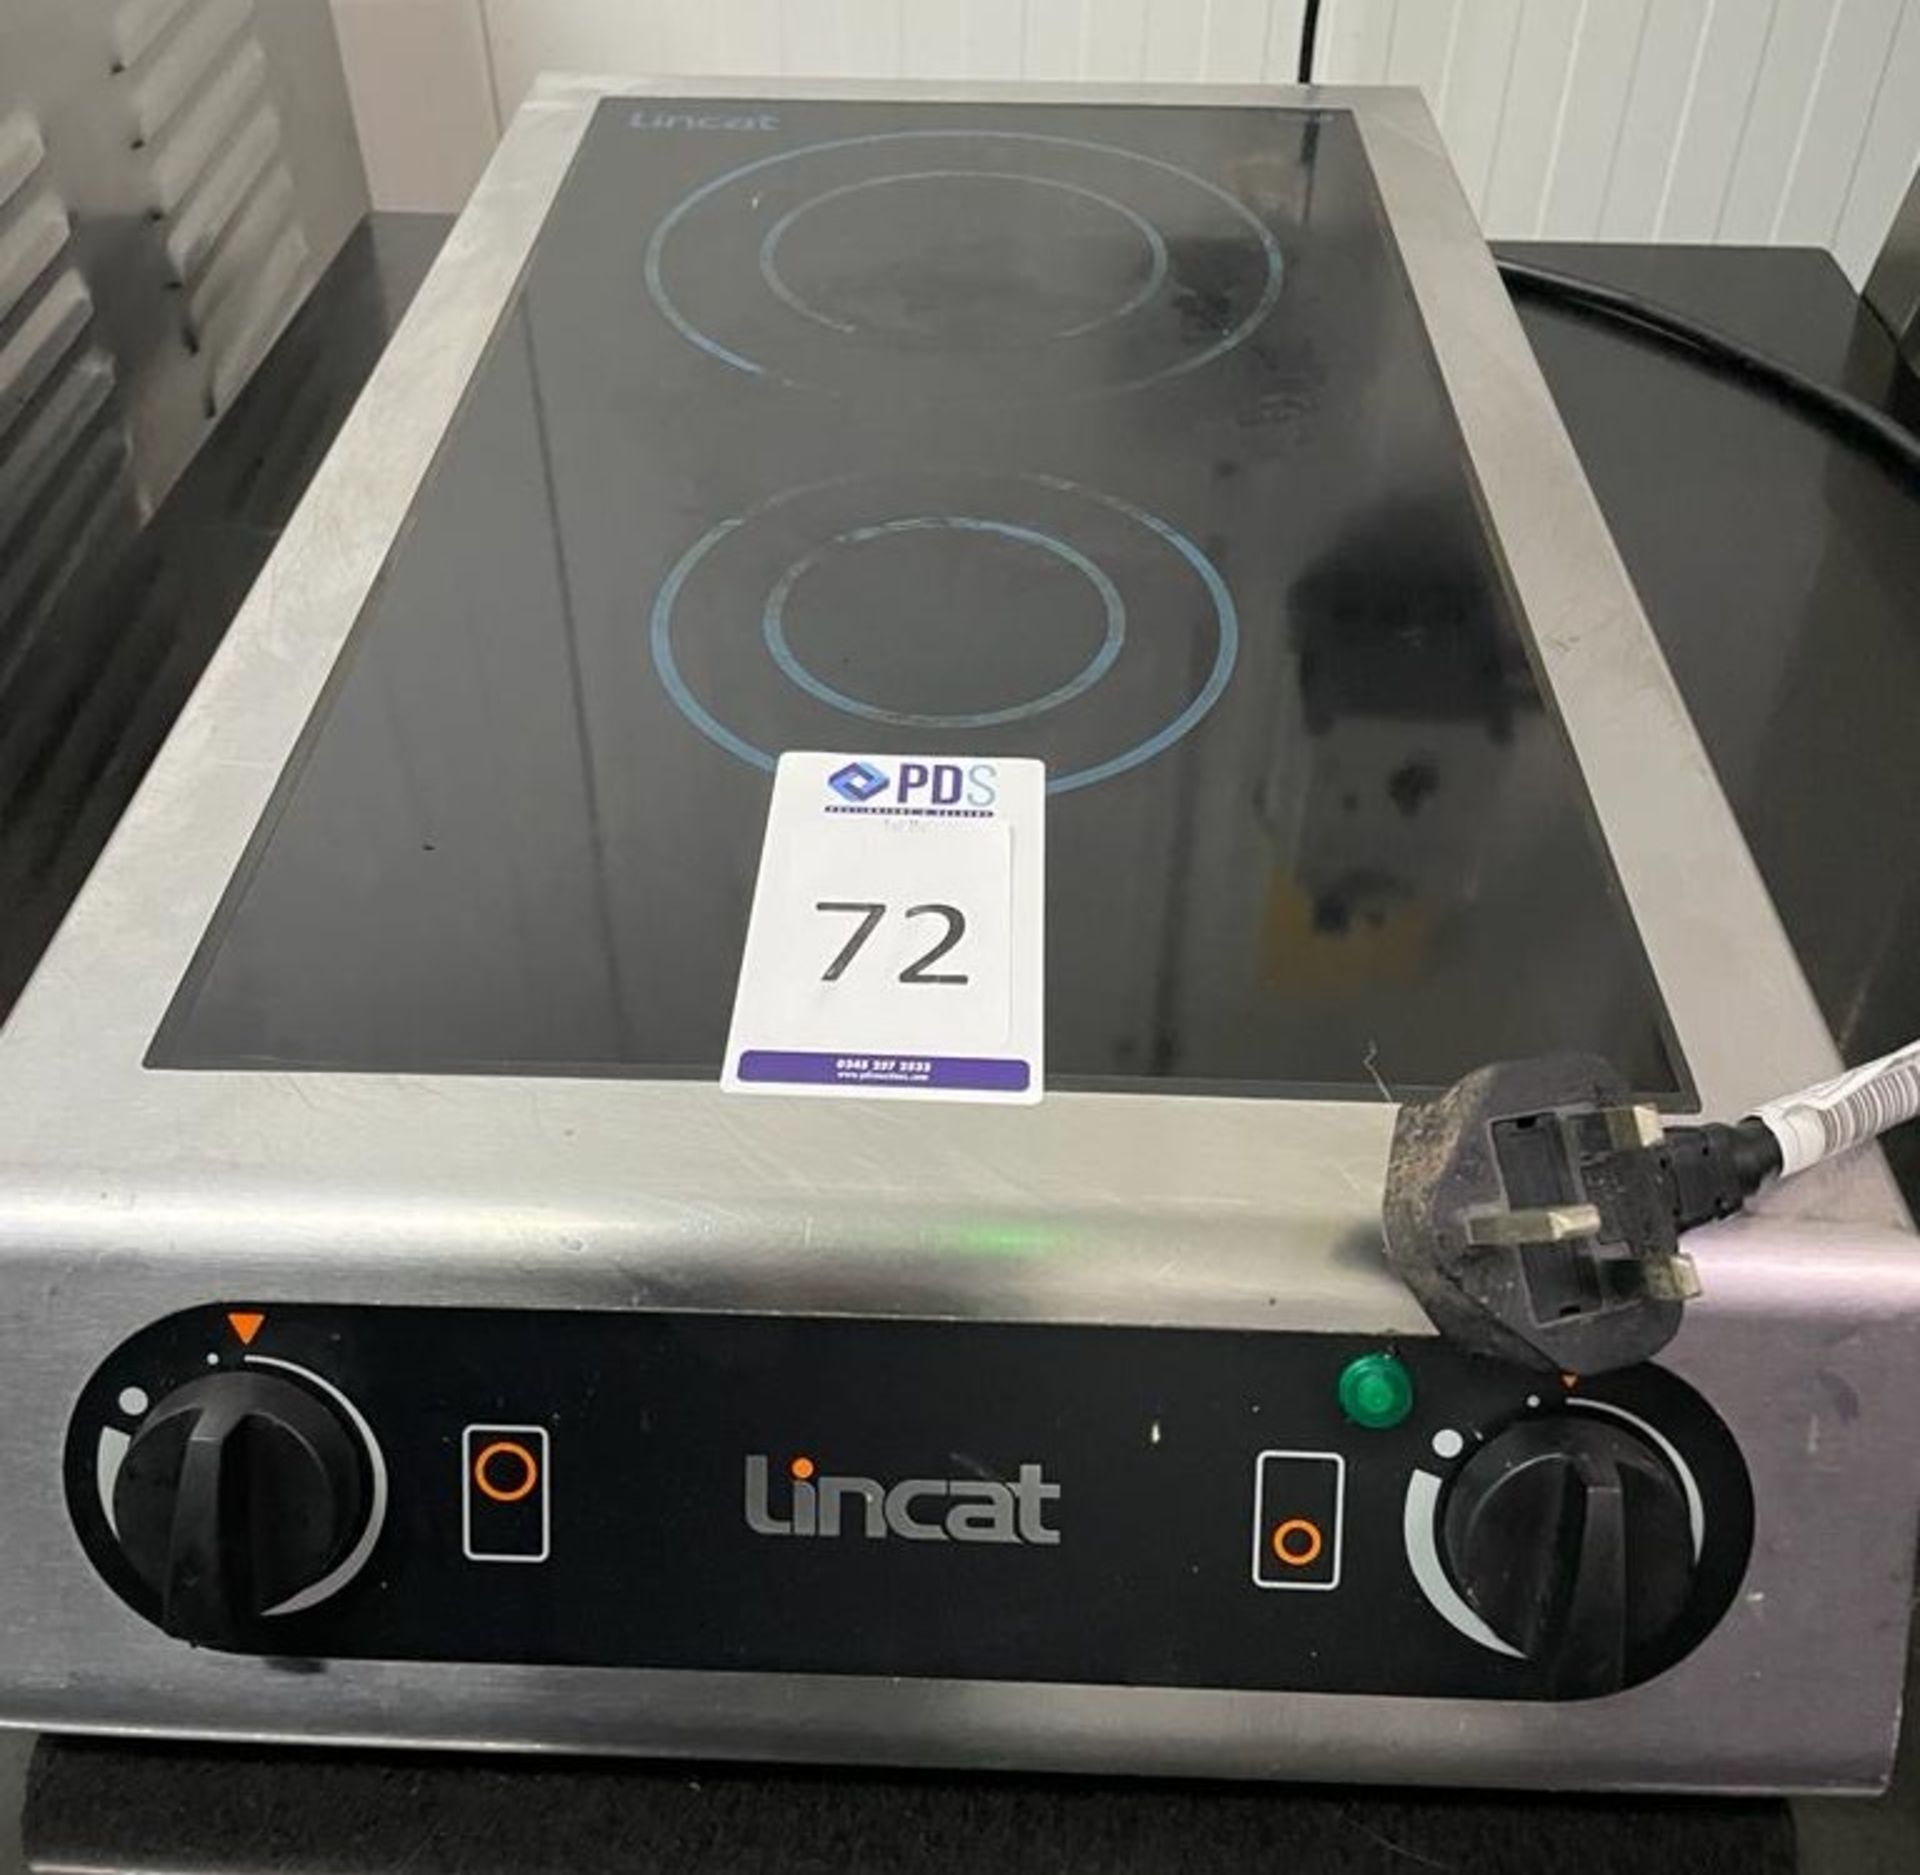 Lincat IH-21 Induction Hob, Serial Number 30169436, 240v (Location: NW London. Please Refer to